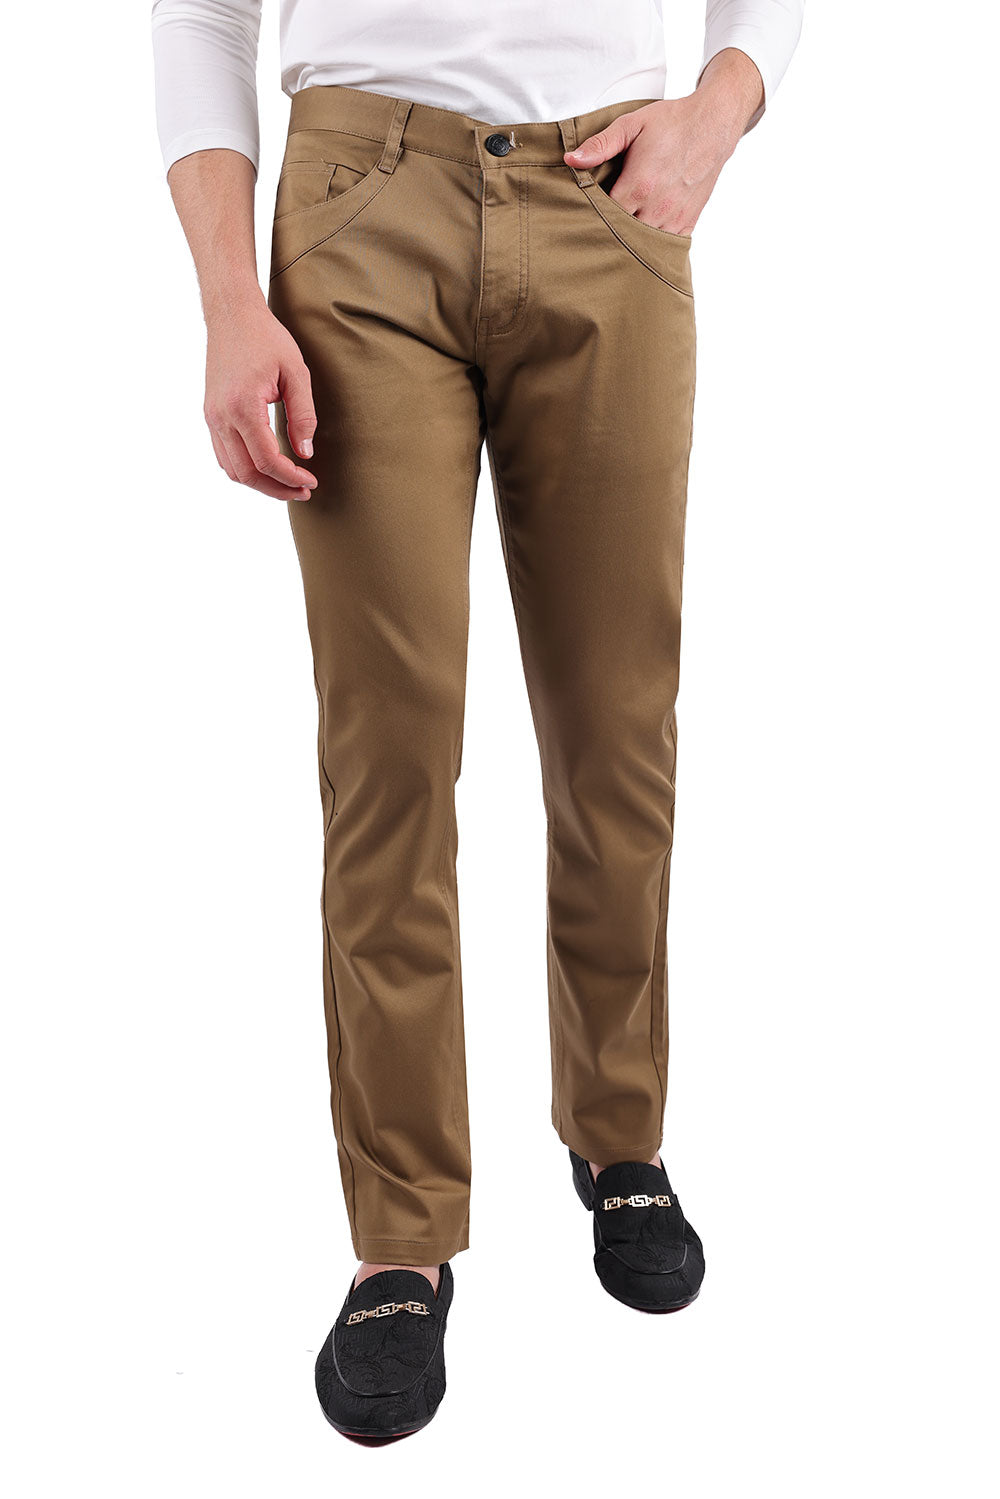 Barabas Men's Solid Color Basic Essential Chino Dress Pants 3CPW31 Khaki